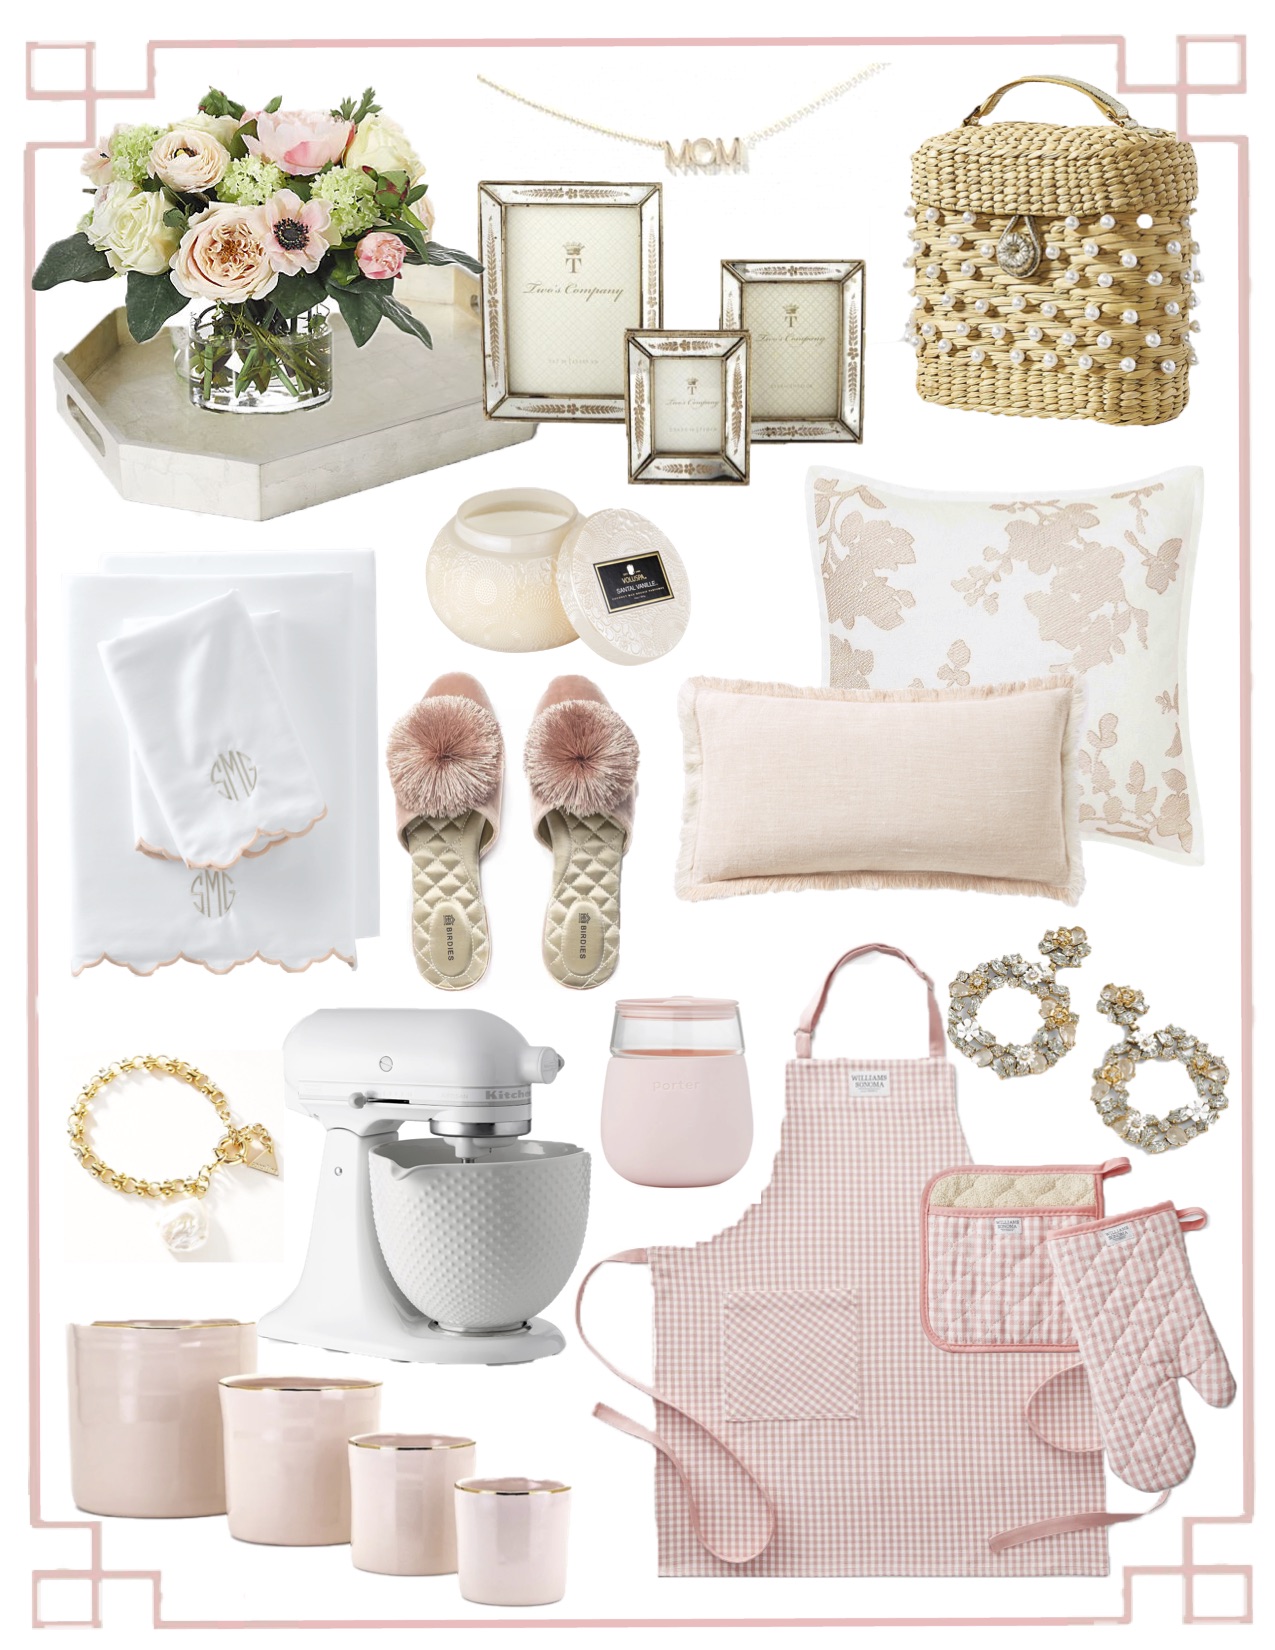 Friday Favorites: Mother’s Day Gift Ideas